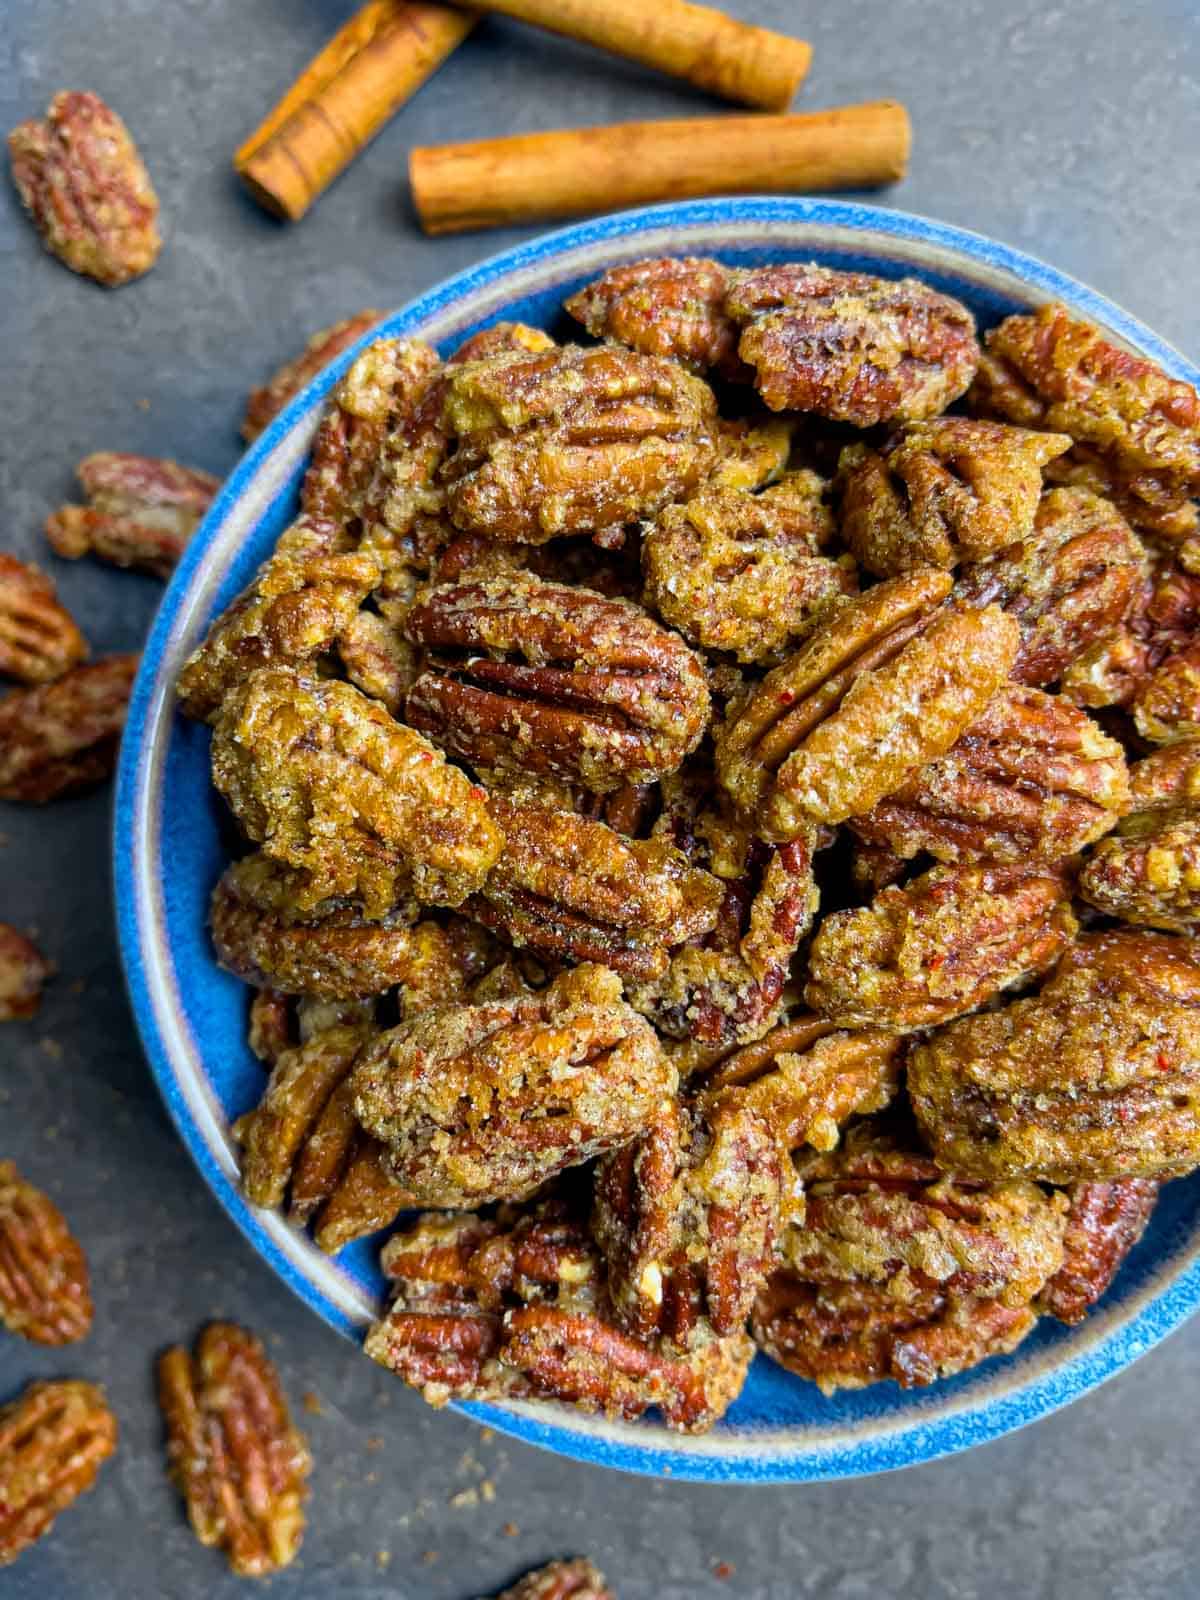 Glaze encrusted candied pecans overflowing a blue bowl with cinnamon sticks and more pecans scattered around.